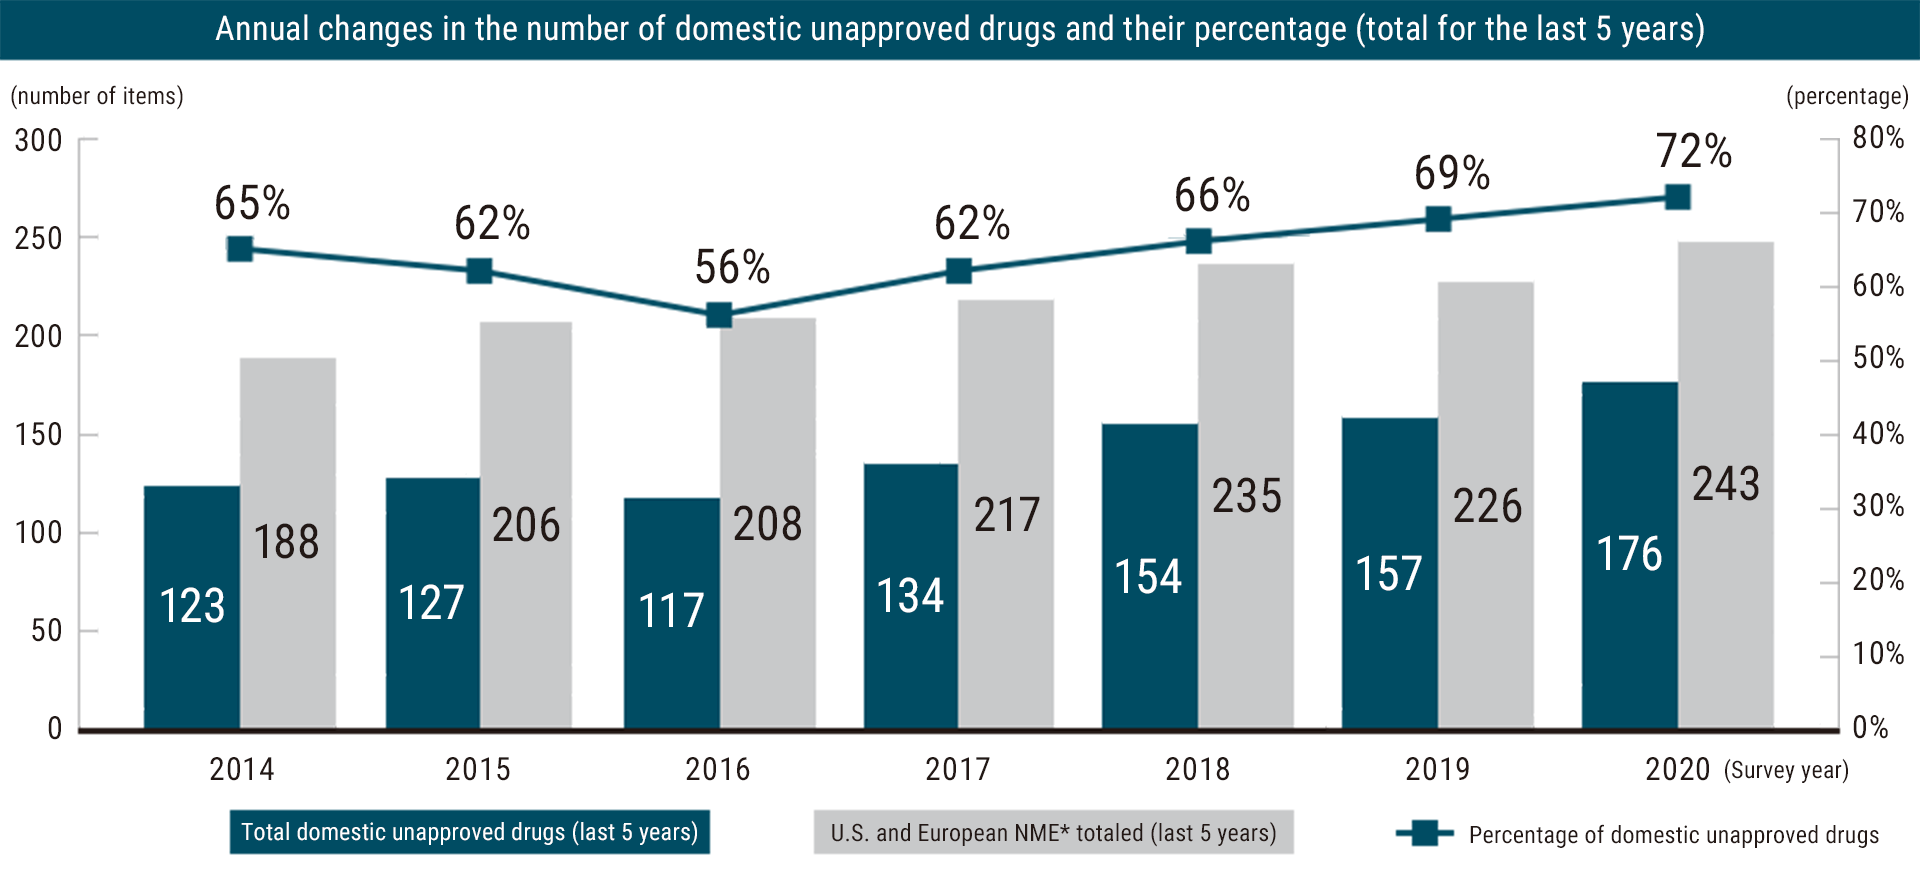 Graph of the number of unapproved drugs in Japan and the percentage of unapproved drugs on an annual basis (total for the last 5 years). Total domestic unapproved drugs (most recent 5 years): 123 in 2014, 127 in 2015, 117 in 2016, 134 in 2017, 154 in 2018, 157 in 2019, 176 in 2020.Total European and US drugs with new active ingredients (most recent 5 years): 188 in 2014, 206 in 2015, 208 in 2016, 208 in 217 in 2017, 235 in 2018, 226 in 2019, 243 in 2020. percentage of unapproved drugs in Japan: 65% in 2014, 62% in 2015, 56% in 2016, 62% in 2017, 66% in 2018, 69% in 2019, 72% in 2020.